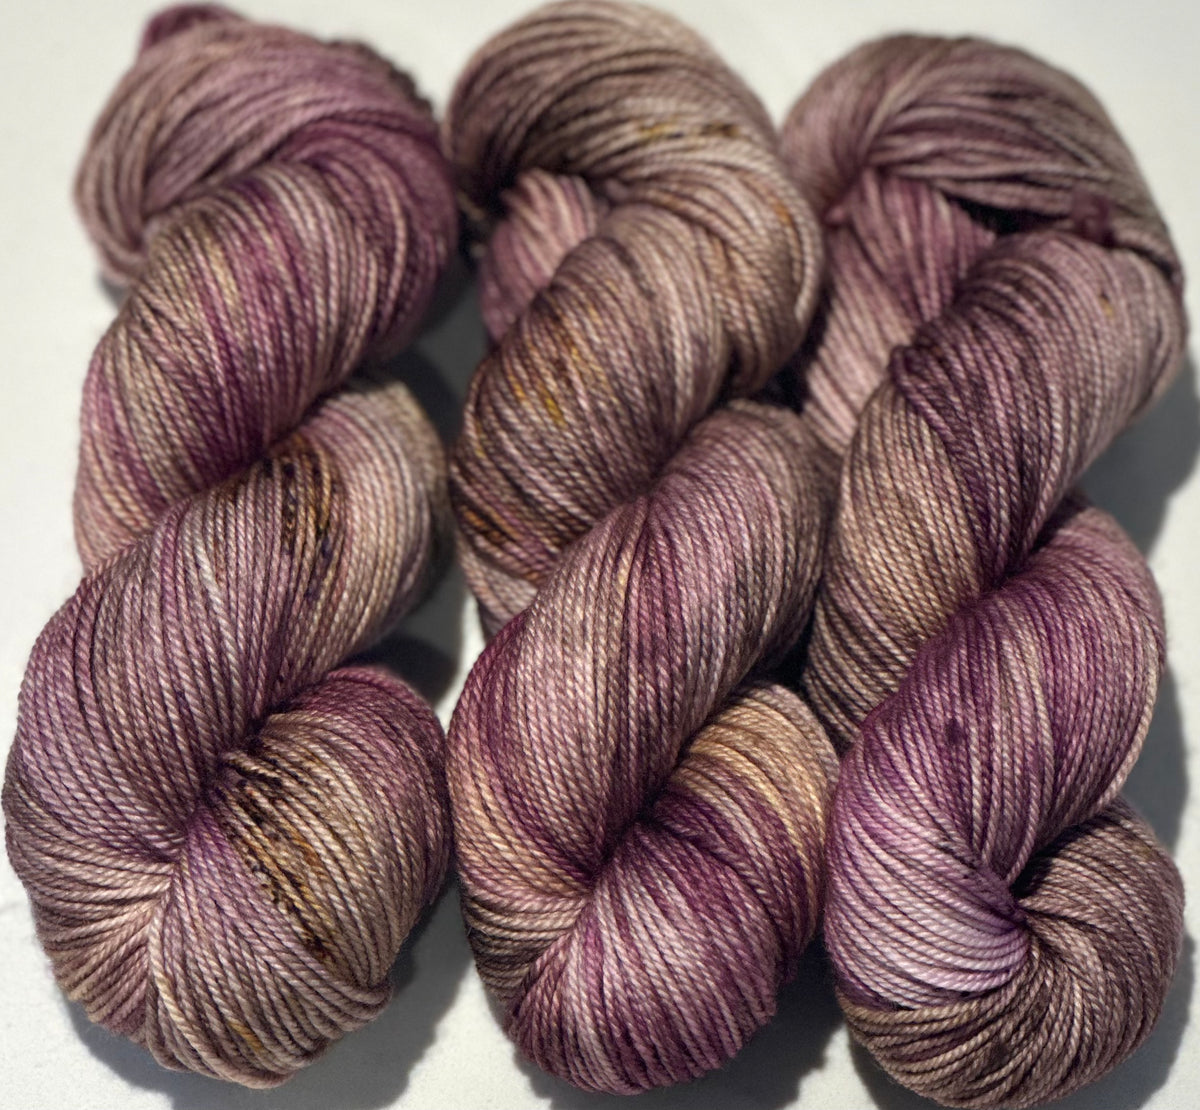 ULTRA VIOLET on the Sport Weight Base Hand Dyed Yarn 100g Skein